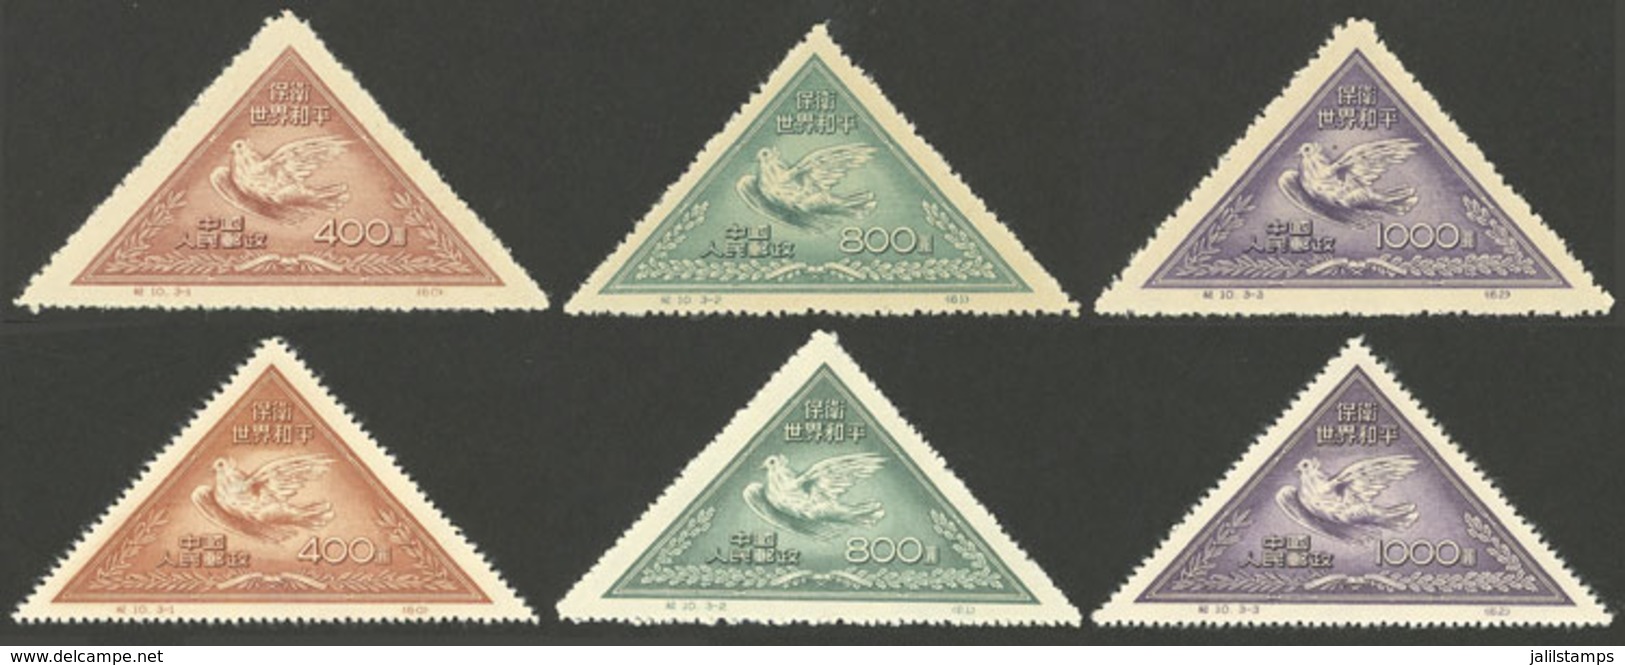 CHINA: Sc.108/110, 1951 Dove, World Peace, Cmpl. Set Of 3 Values, Mint Very Lightly Hinged (issued Without Gum), ORIGINA - Oblitérés